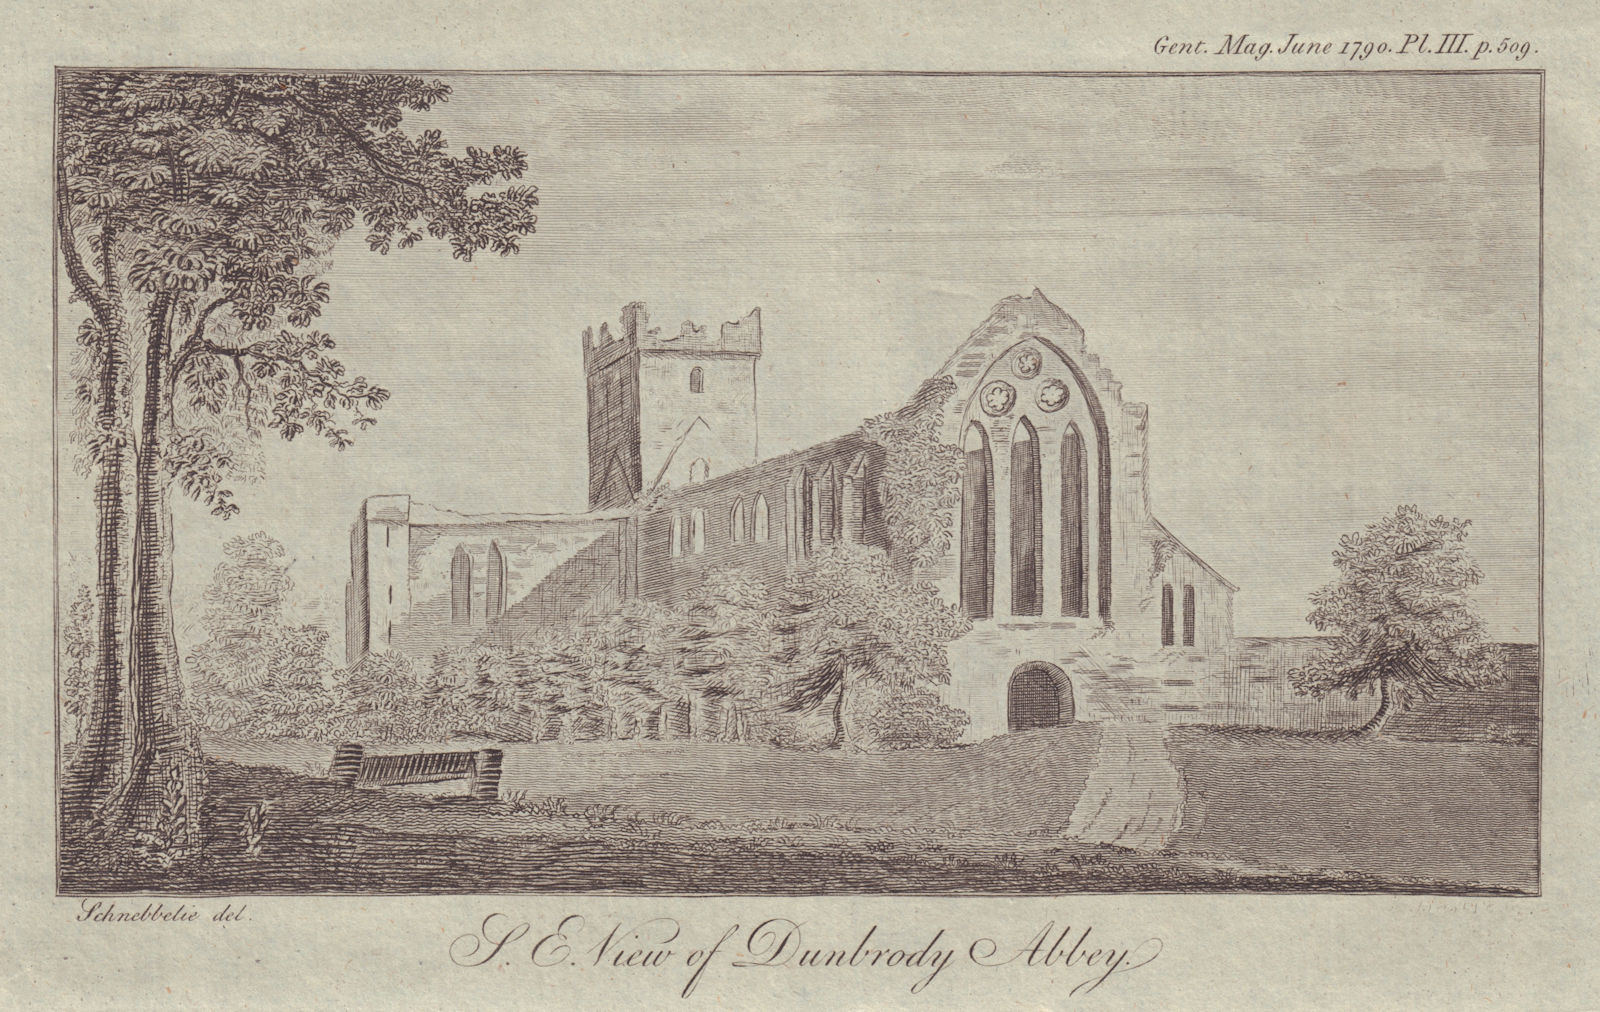 S. E. View of Dunbrody Abbey[in Wexford, Ireland. GENTS MAG 1790 old print